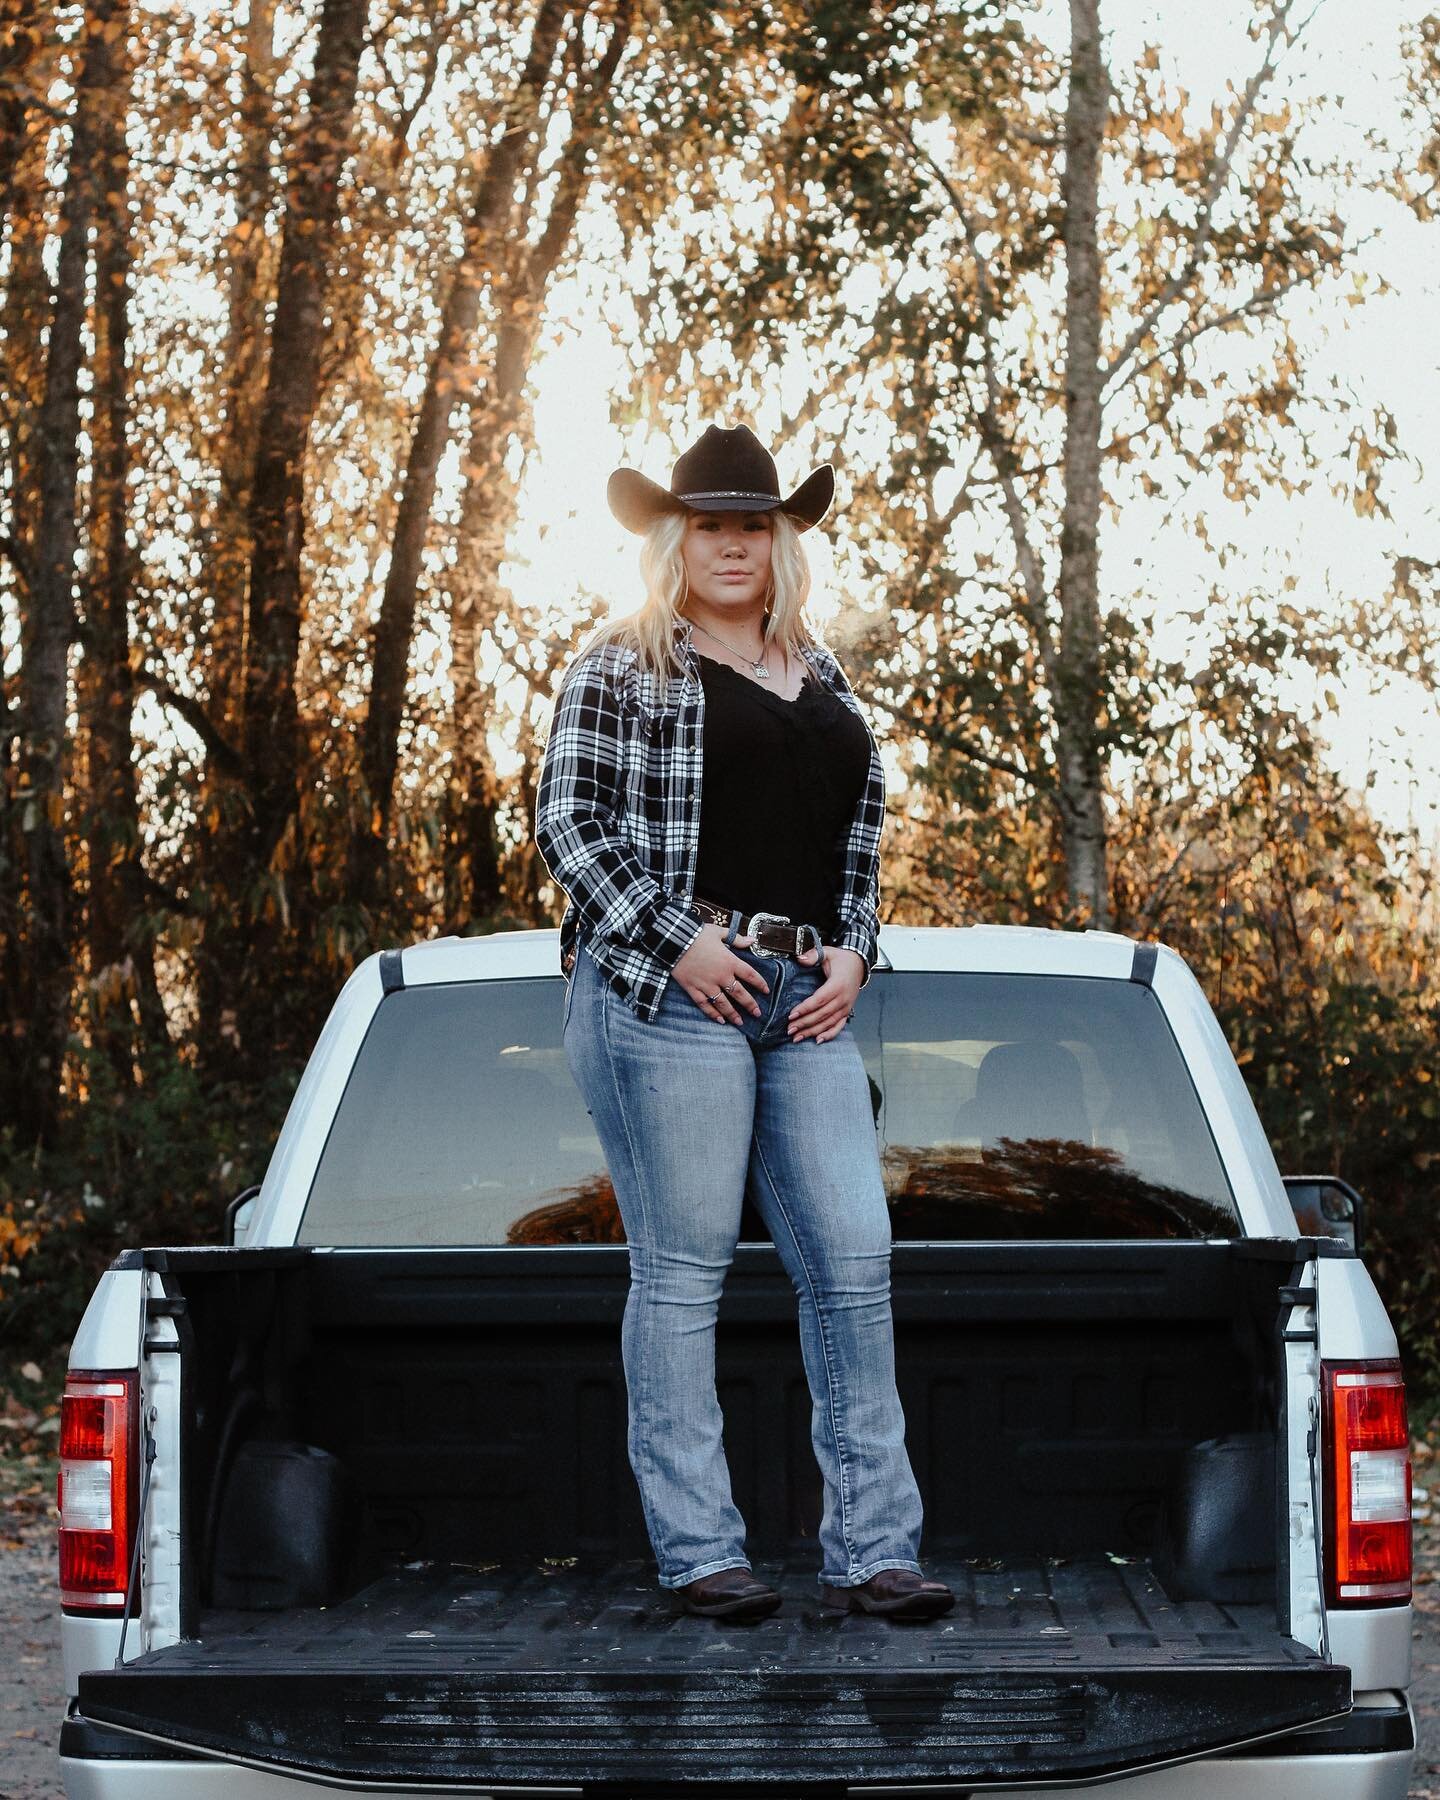 She&rsquo;ll shoot your foot and bless your heart ❤️&zwj;🔥 #washingtonphotographer #countrygirl #strong #portraitphotography